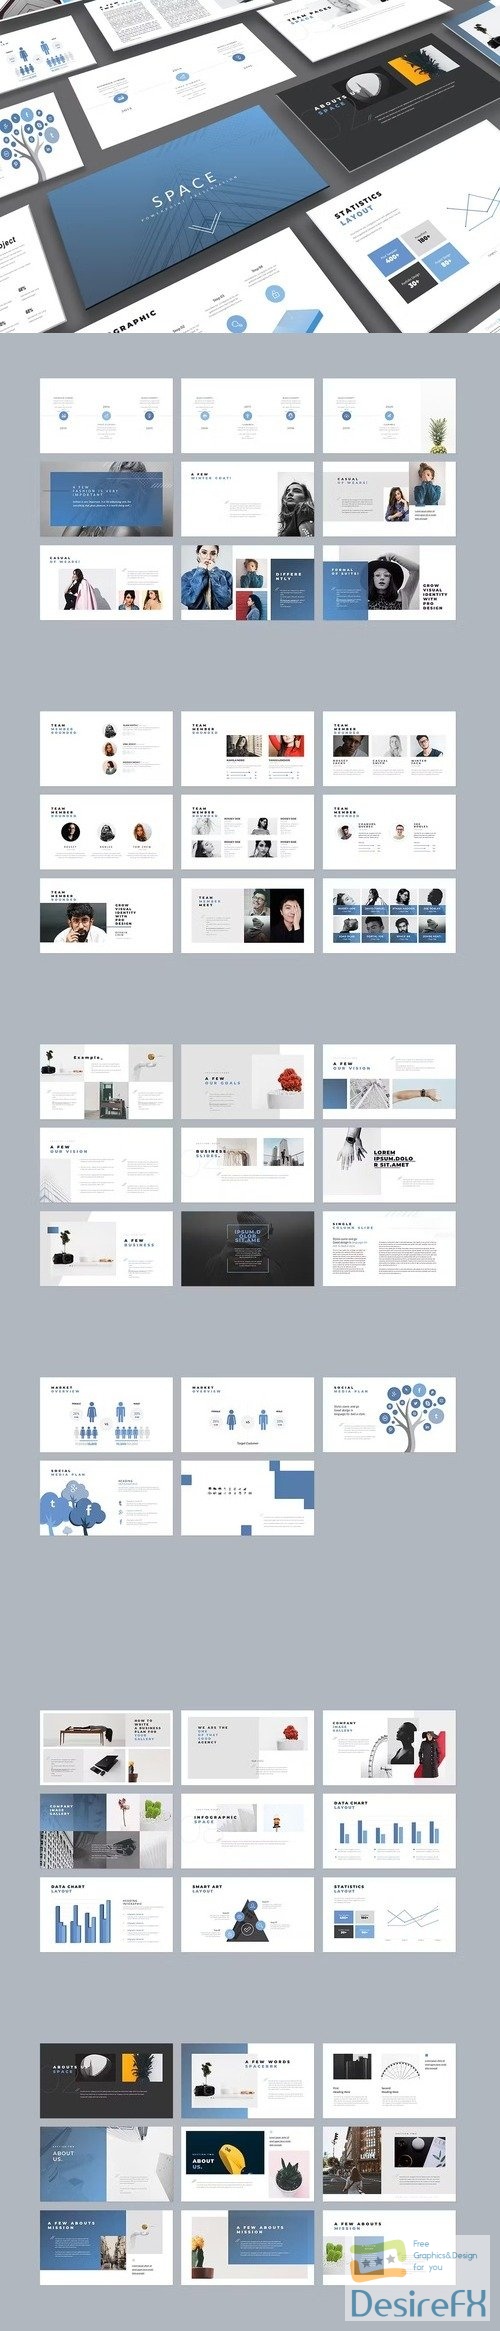 Space - PowerPoint Presentation Template